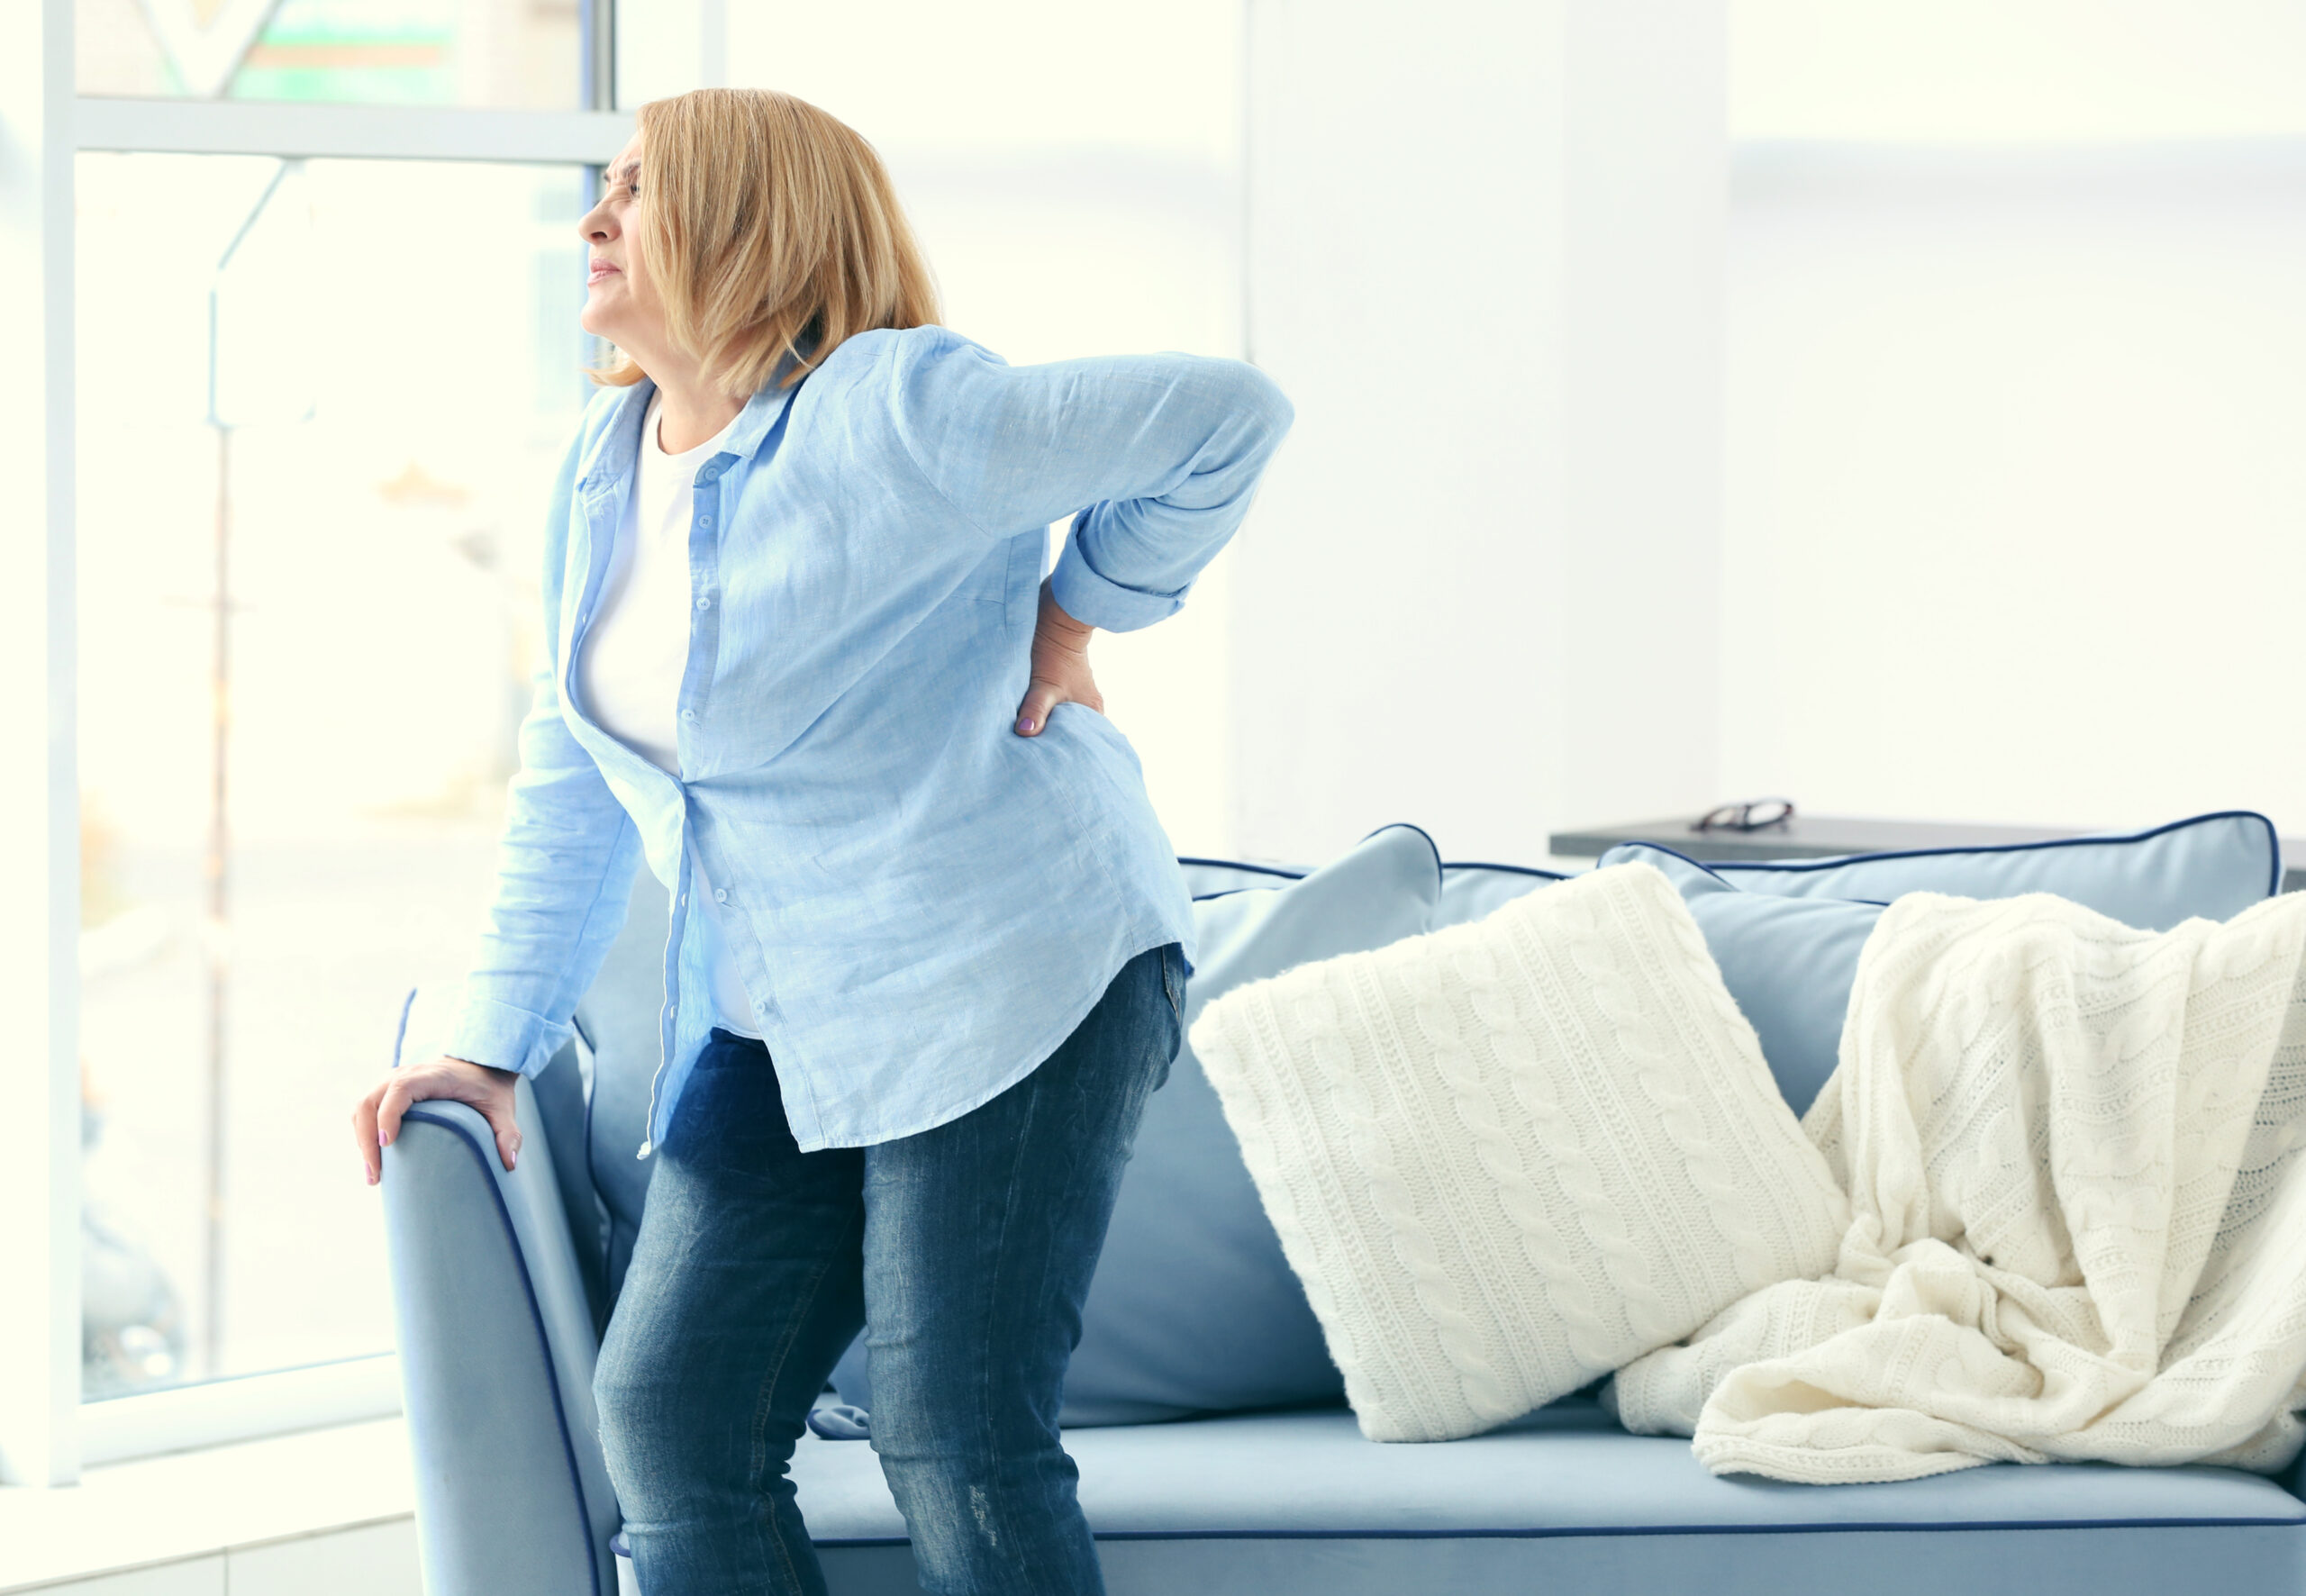 woman with chronic back pain - pain management without opioids